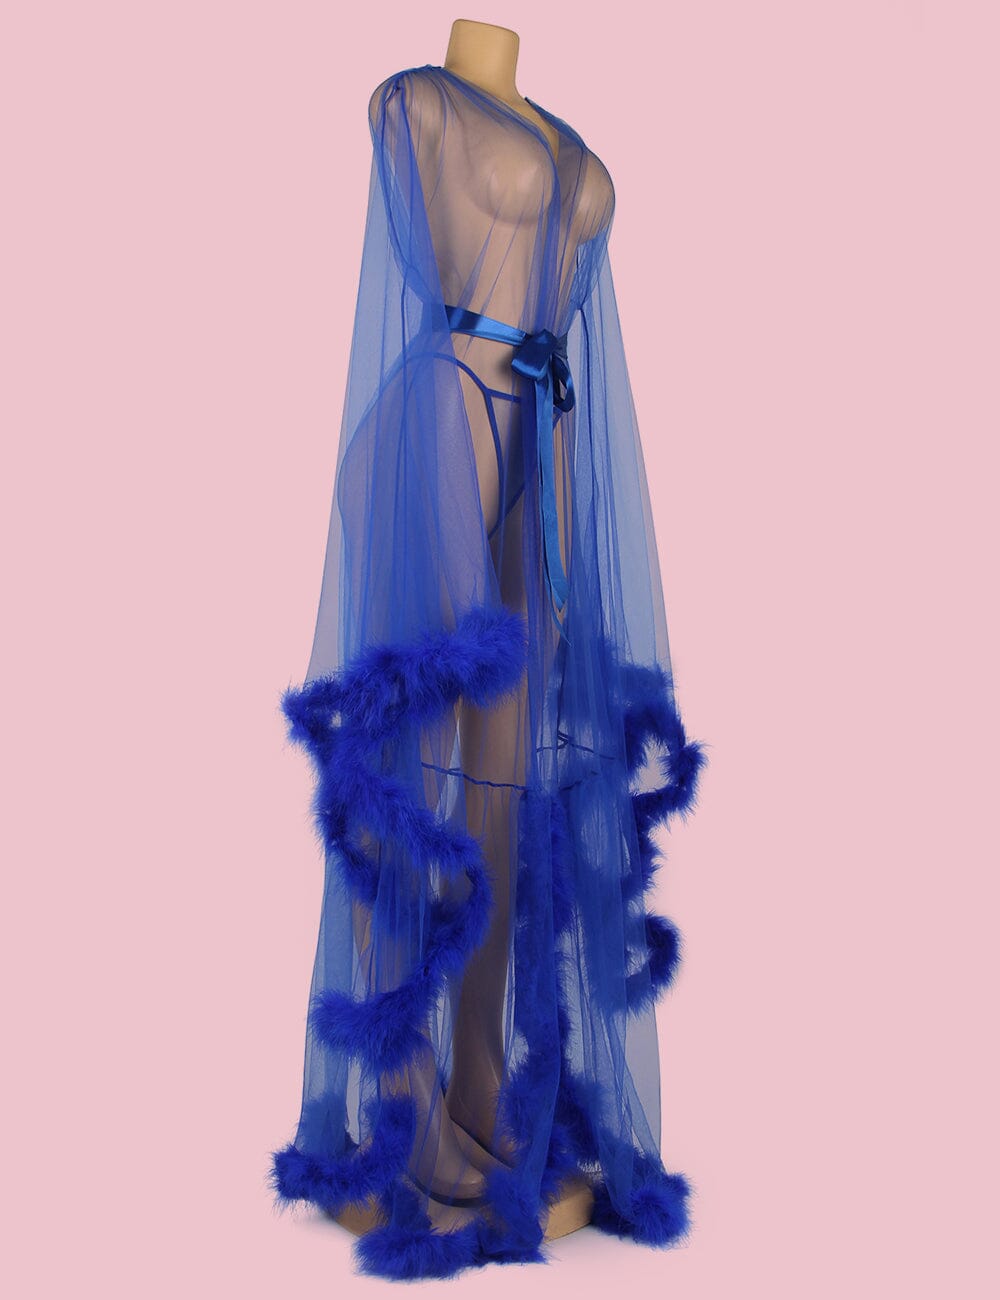 a mannequin wearing a blue dress with feathers on it